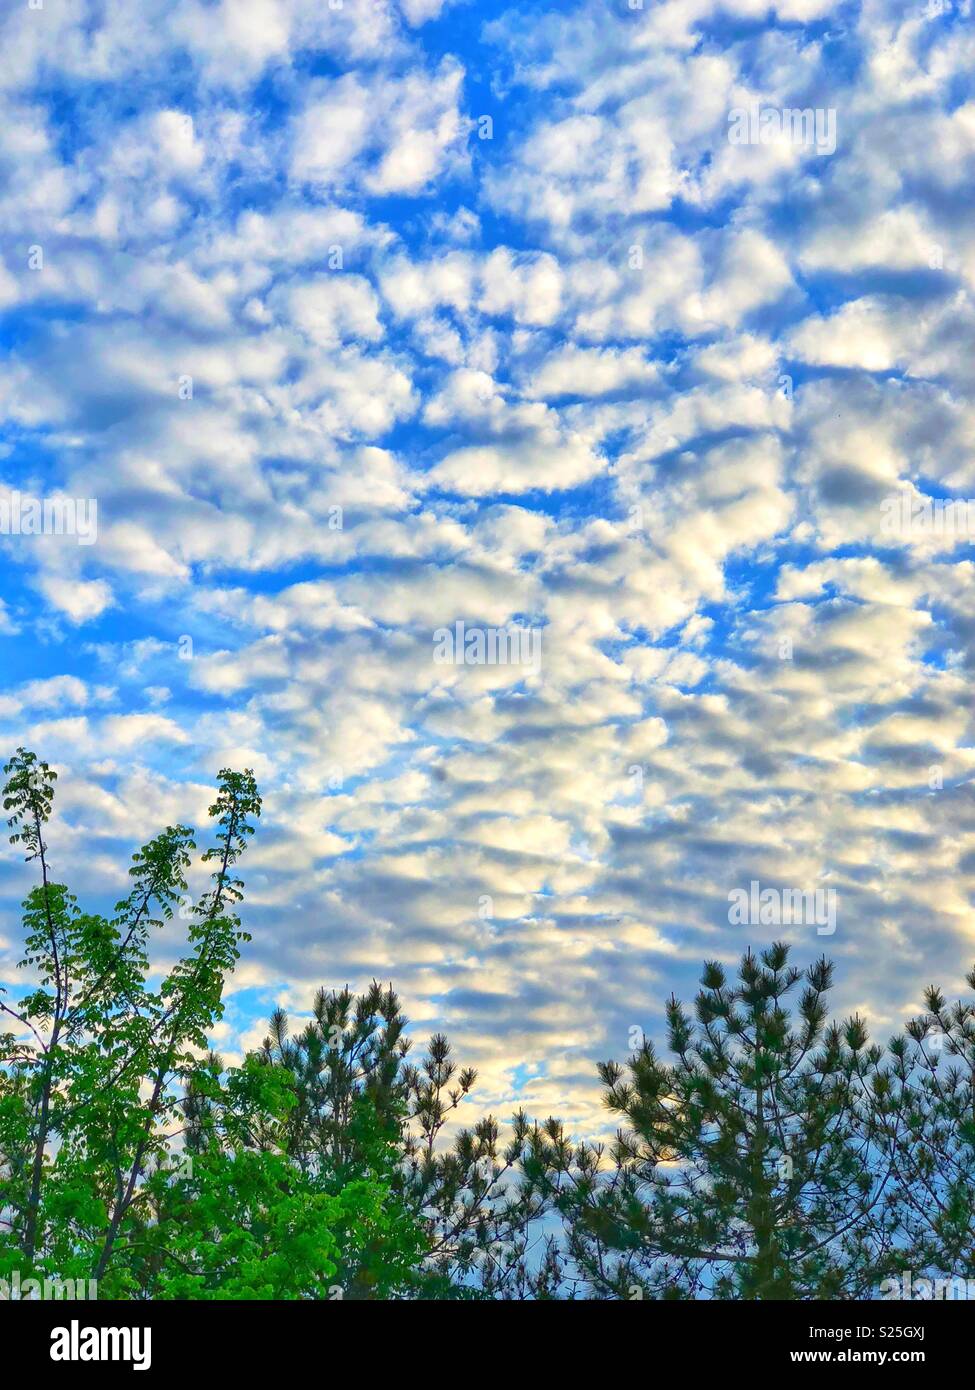 Altocumulus clouds in a bright blue shy with green trees below Stock Photo